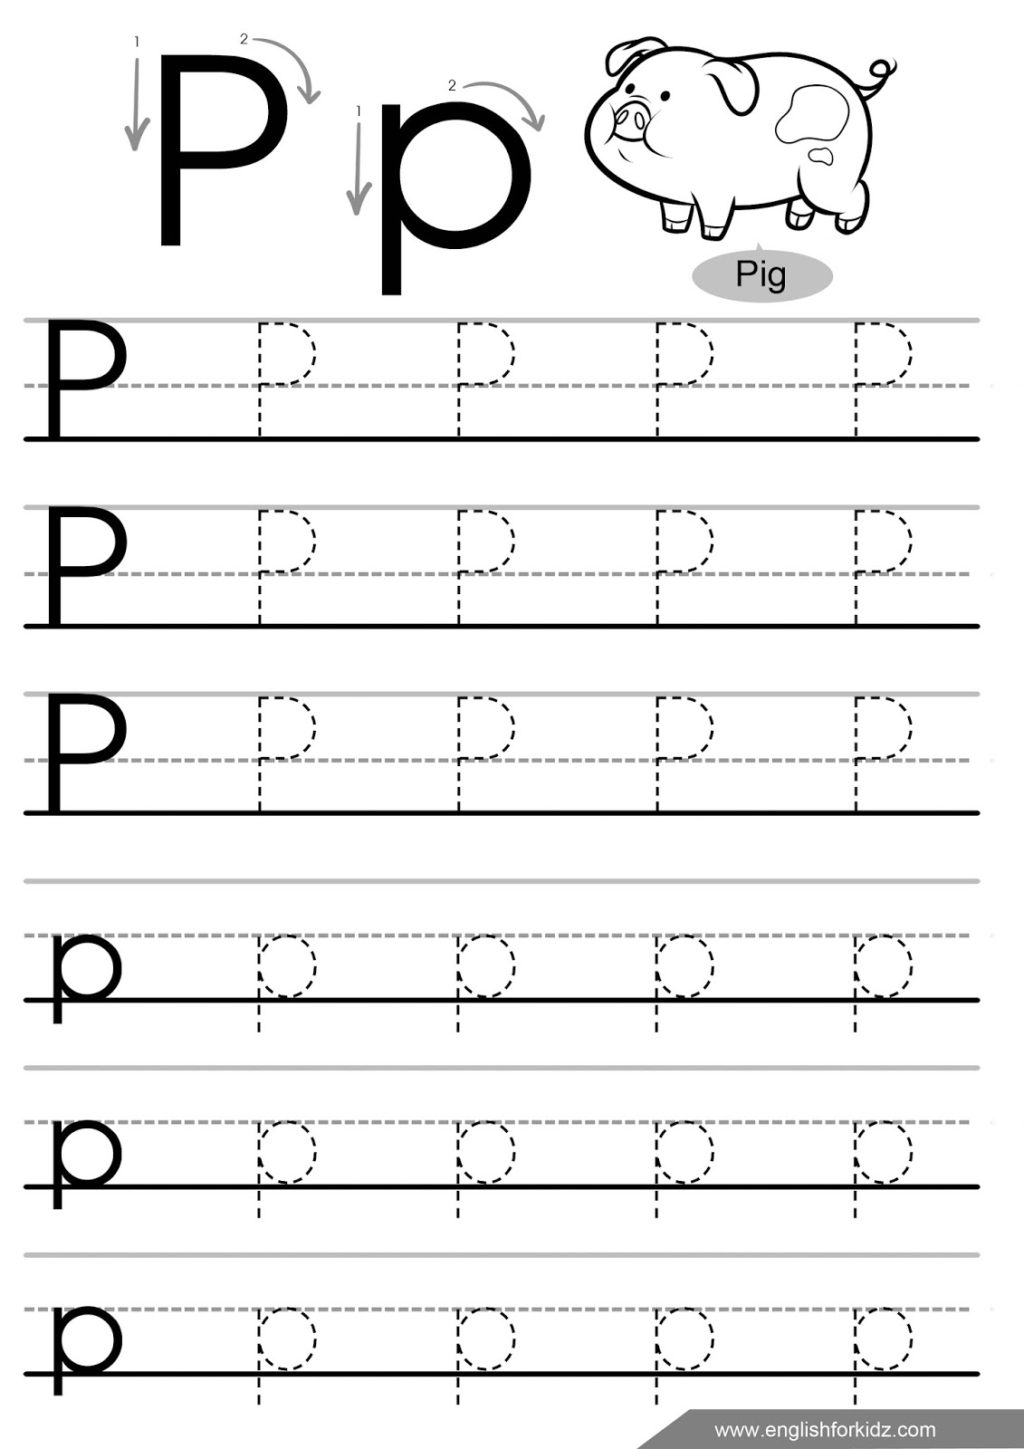 Worksheet ~ Letter P Tracing Worksheet Alphabetblesble with regard to Letter P Tracing For Preschool